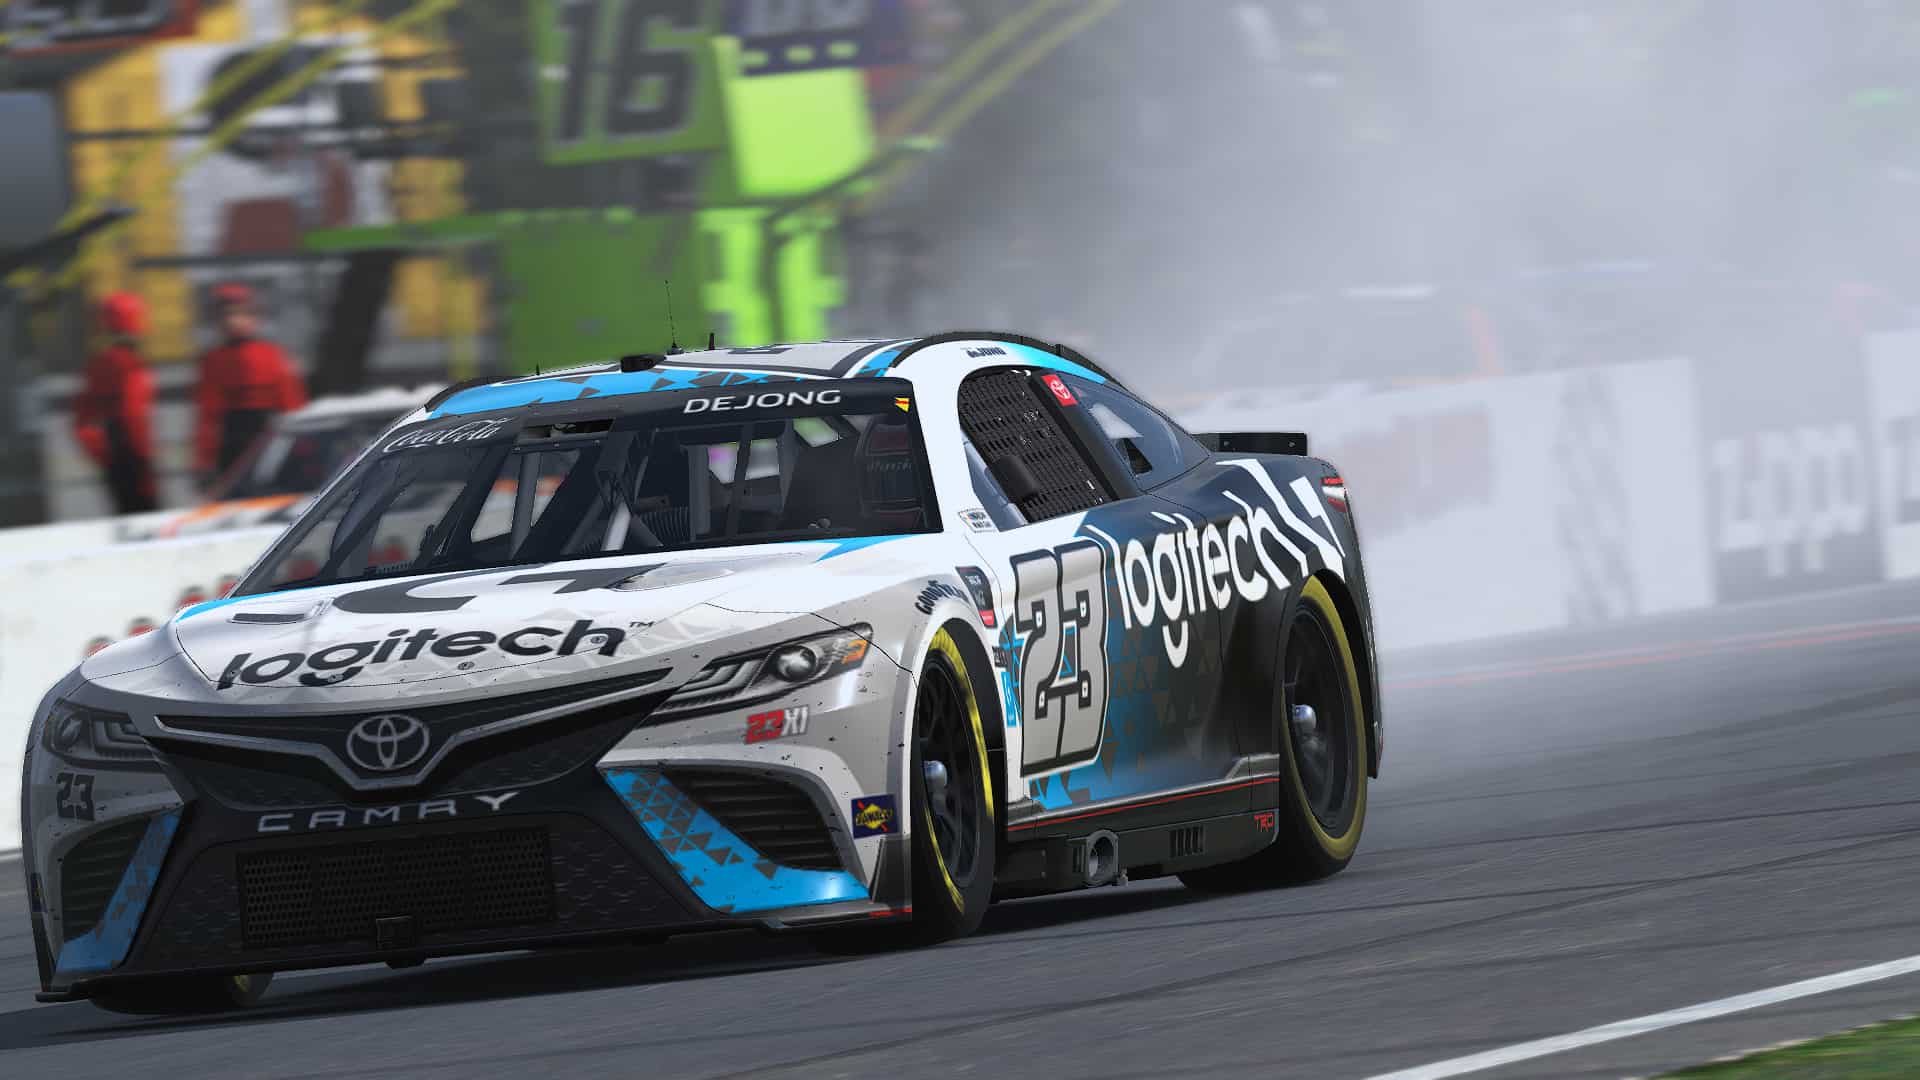 23XI Racing's Mitchell deJong crushed the eNASCAR Coca-Cola iRacing Series competition at Watkins Glen International.